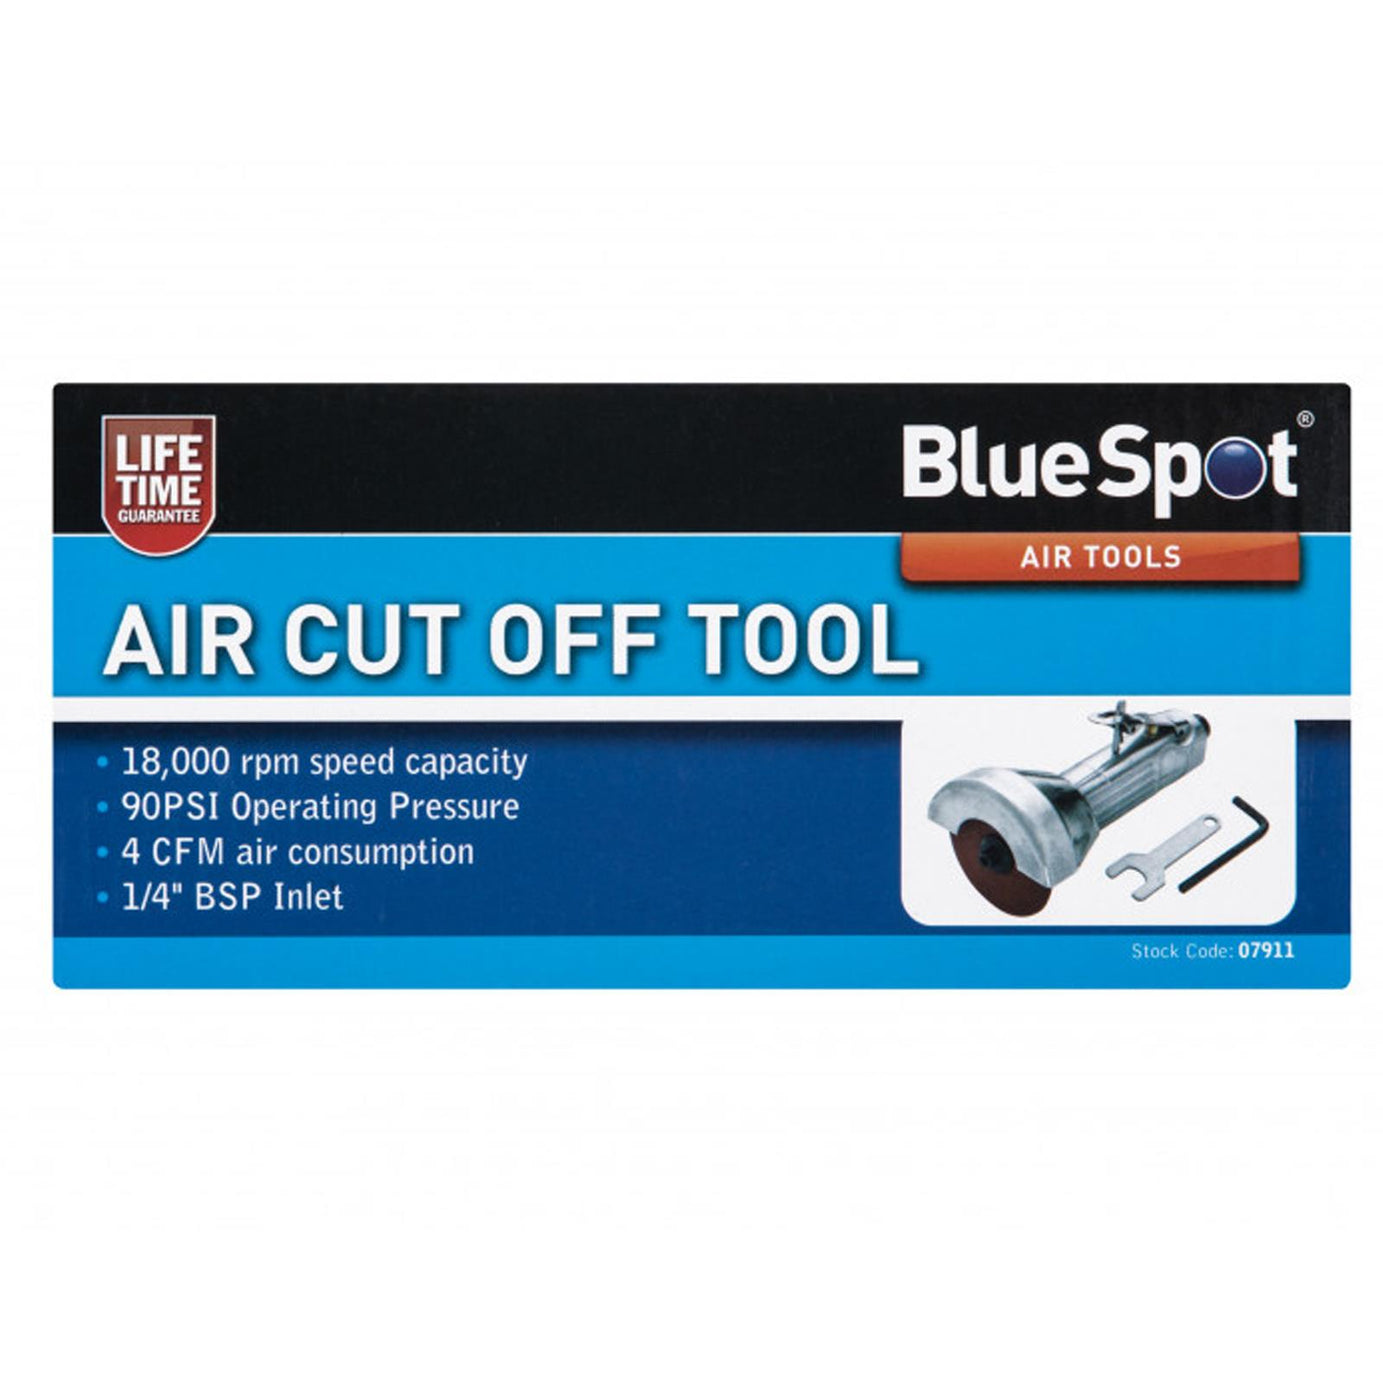 BlueSpot Air Cut Off Tool 90Psi 1/4" BSP Inlet Sheets Exhausts Straight Cutting 3" Disc